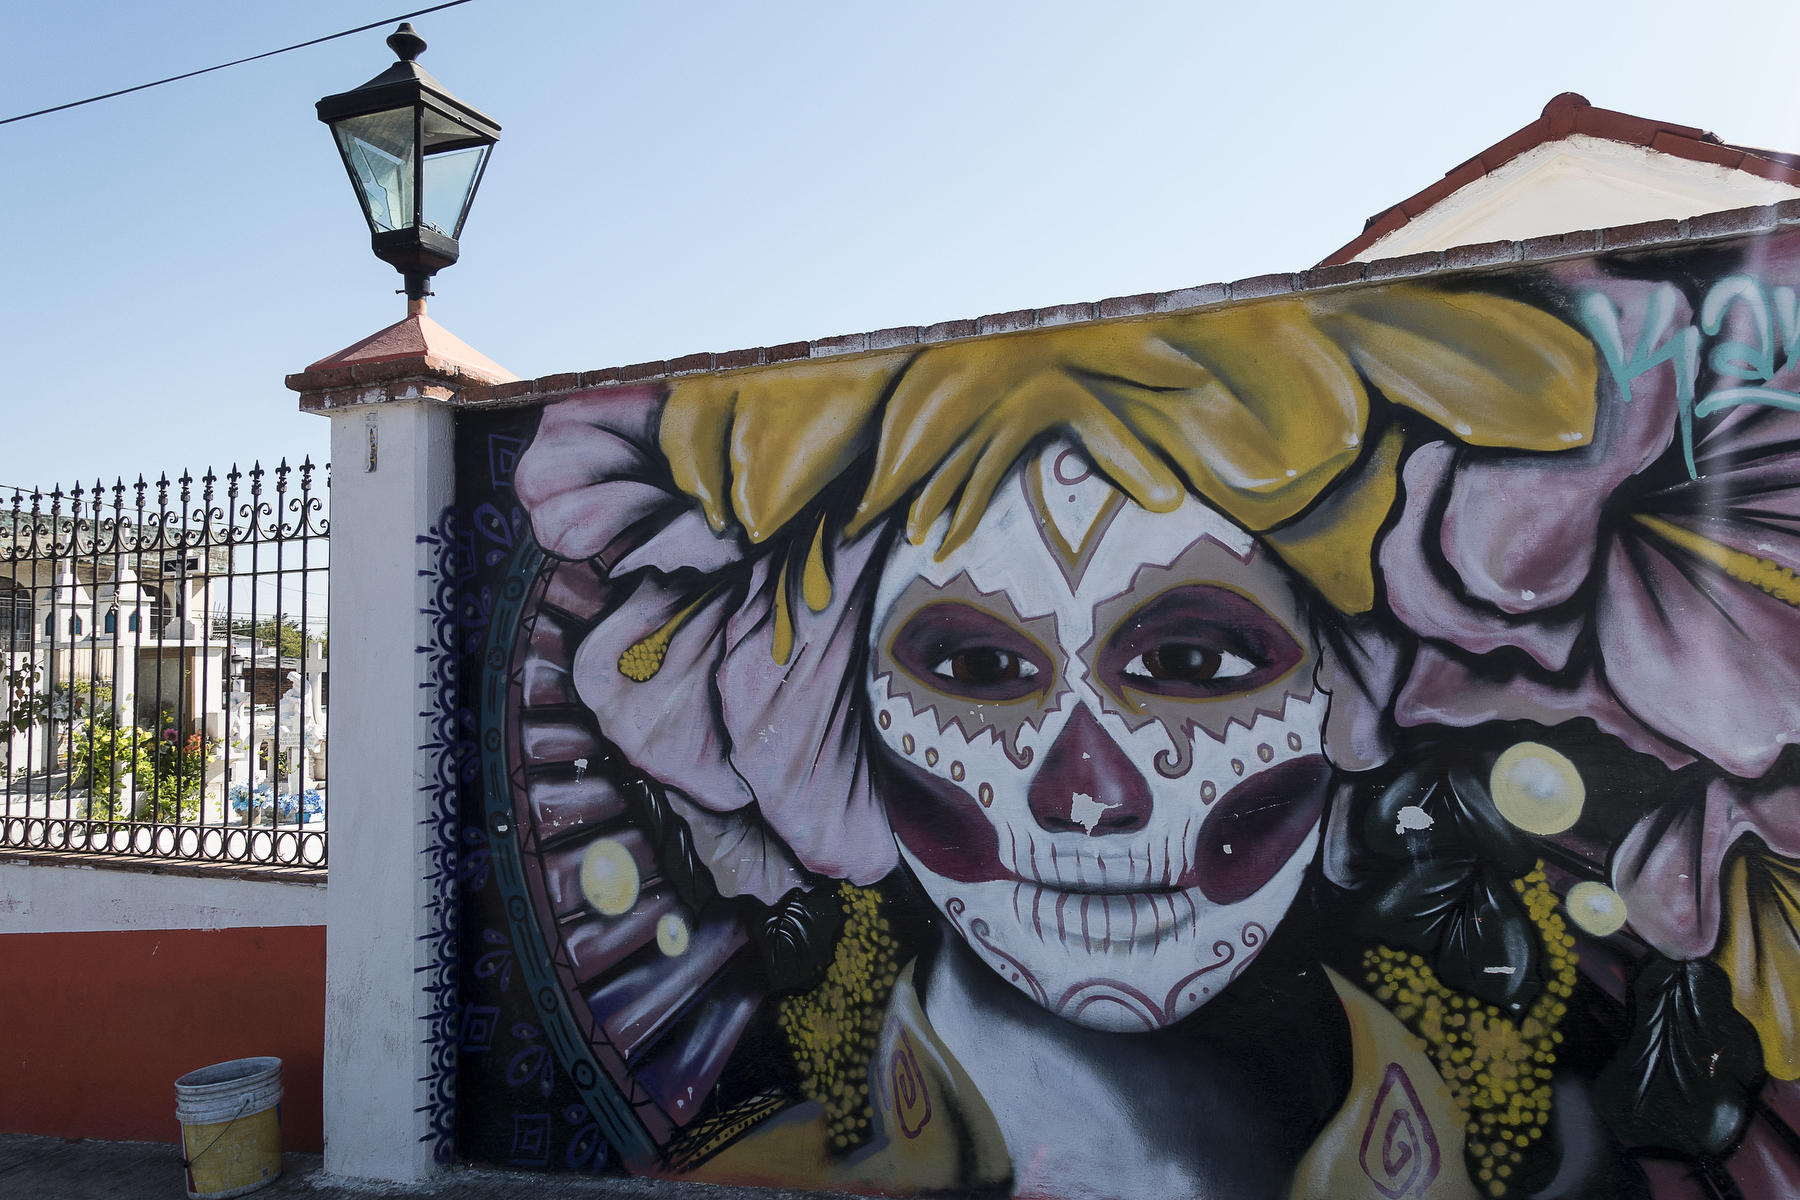 La CATRINA, symbol of The Day of the Dead on the wall of the cemetery.  : PUERTO VALLARTA - Wall Art & Bicycle Tour : Viviane Moos |  Documentary Photographer